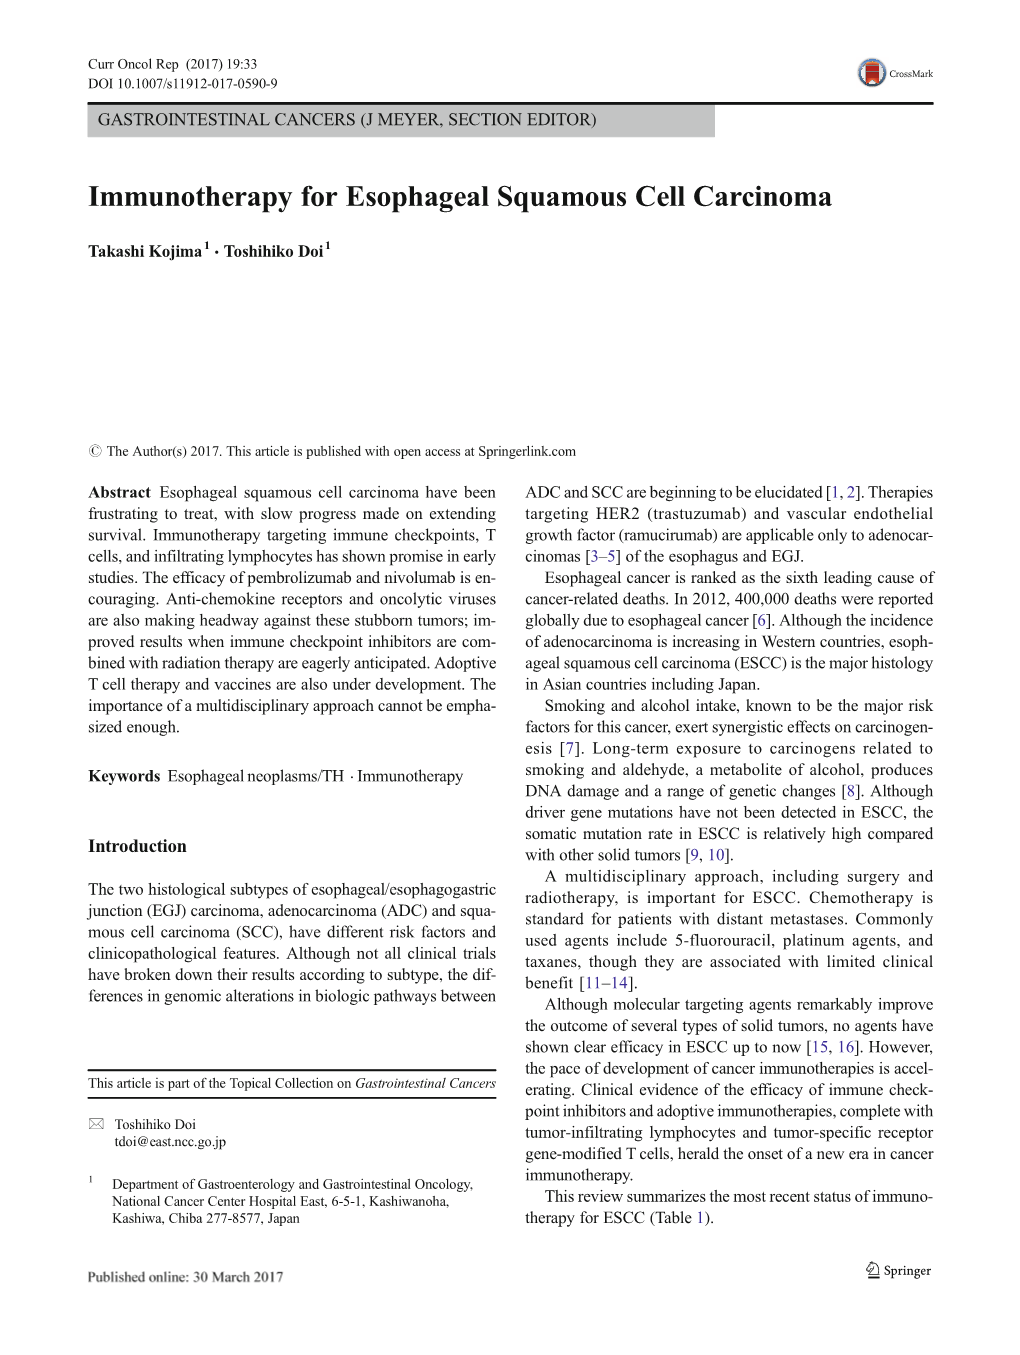 Immunotherapy for Esophageal Squamous Cell Carcinoma